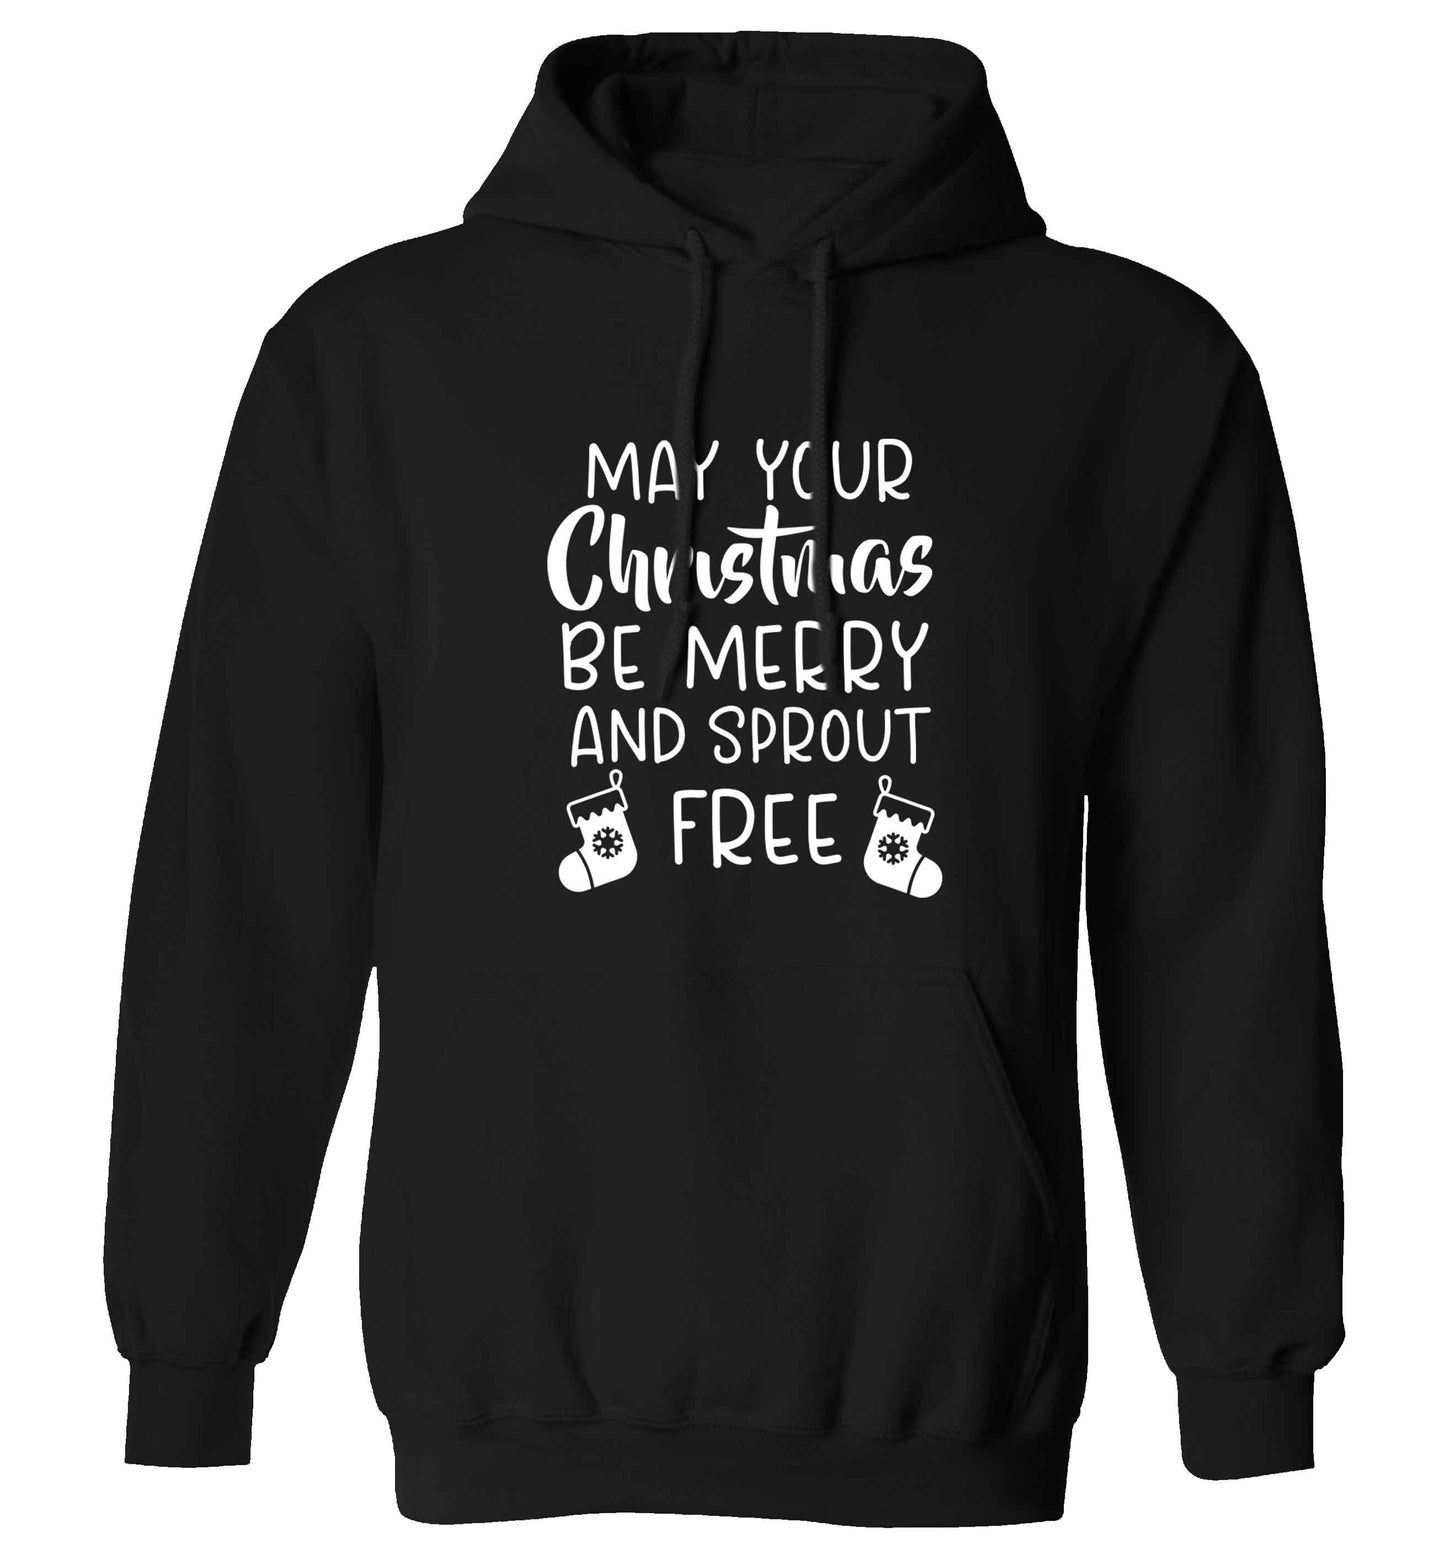 May your Christmas be merry and sprout free adults unisex black hoodie 2XL